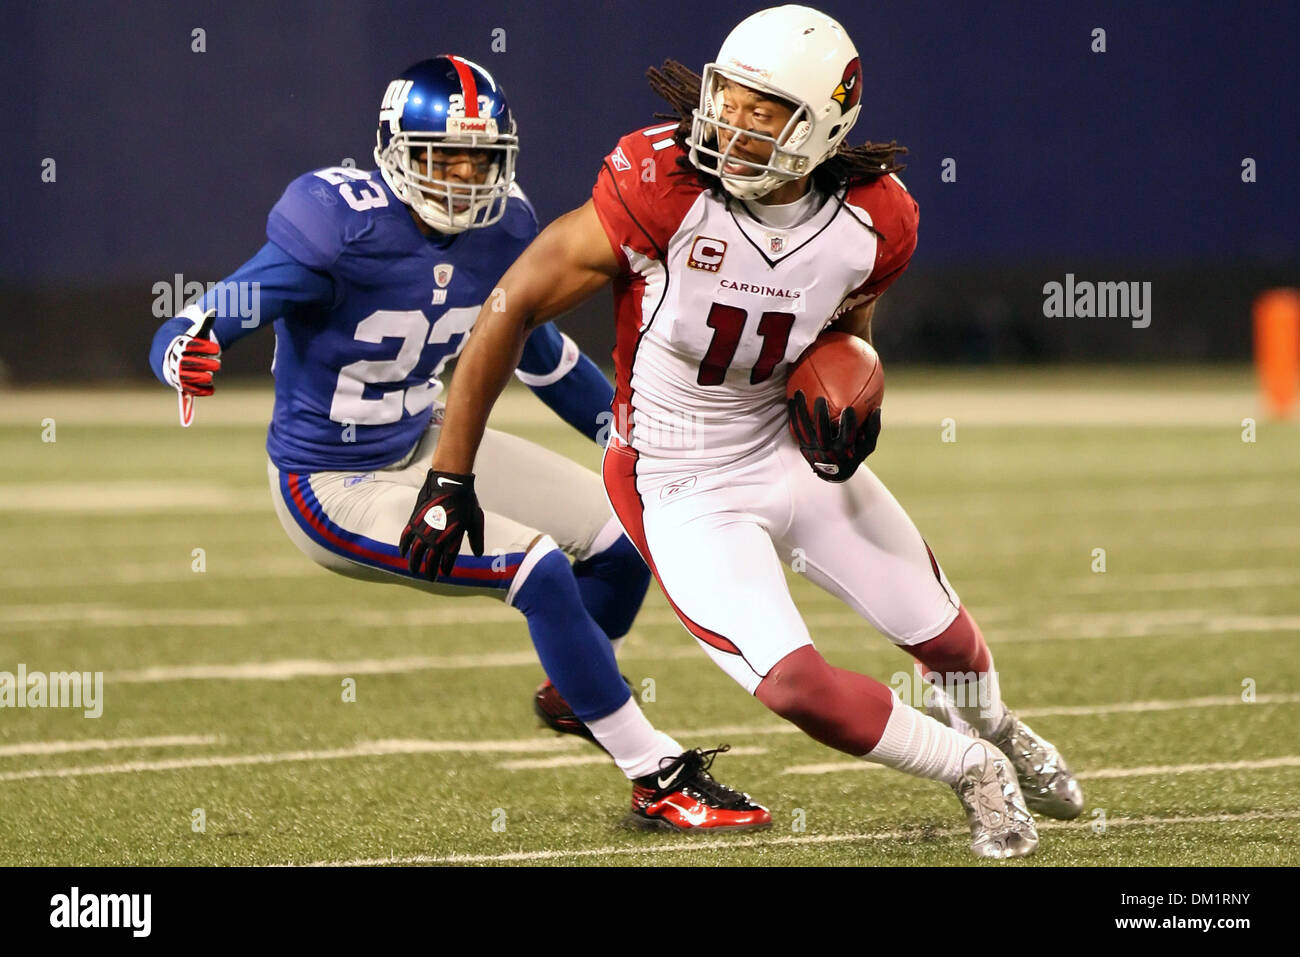 25  October 2009:   Arizona Cardinals #11 wide receiver Larry Fitzgerald evades NY's #23 corner back Corey Webster. The Arizona Cardinals defeated the New York Giants 24-17 at Giants Stadium, East Rutherford, NJ. (Credit Image: © Anthony Gruppuso/Southcreek Global/ZUMApress.com) Stock Photo